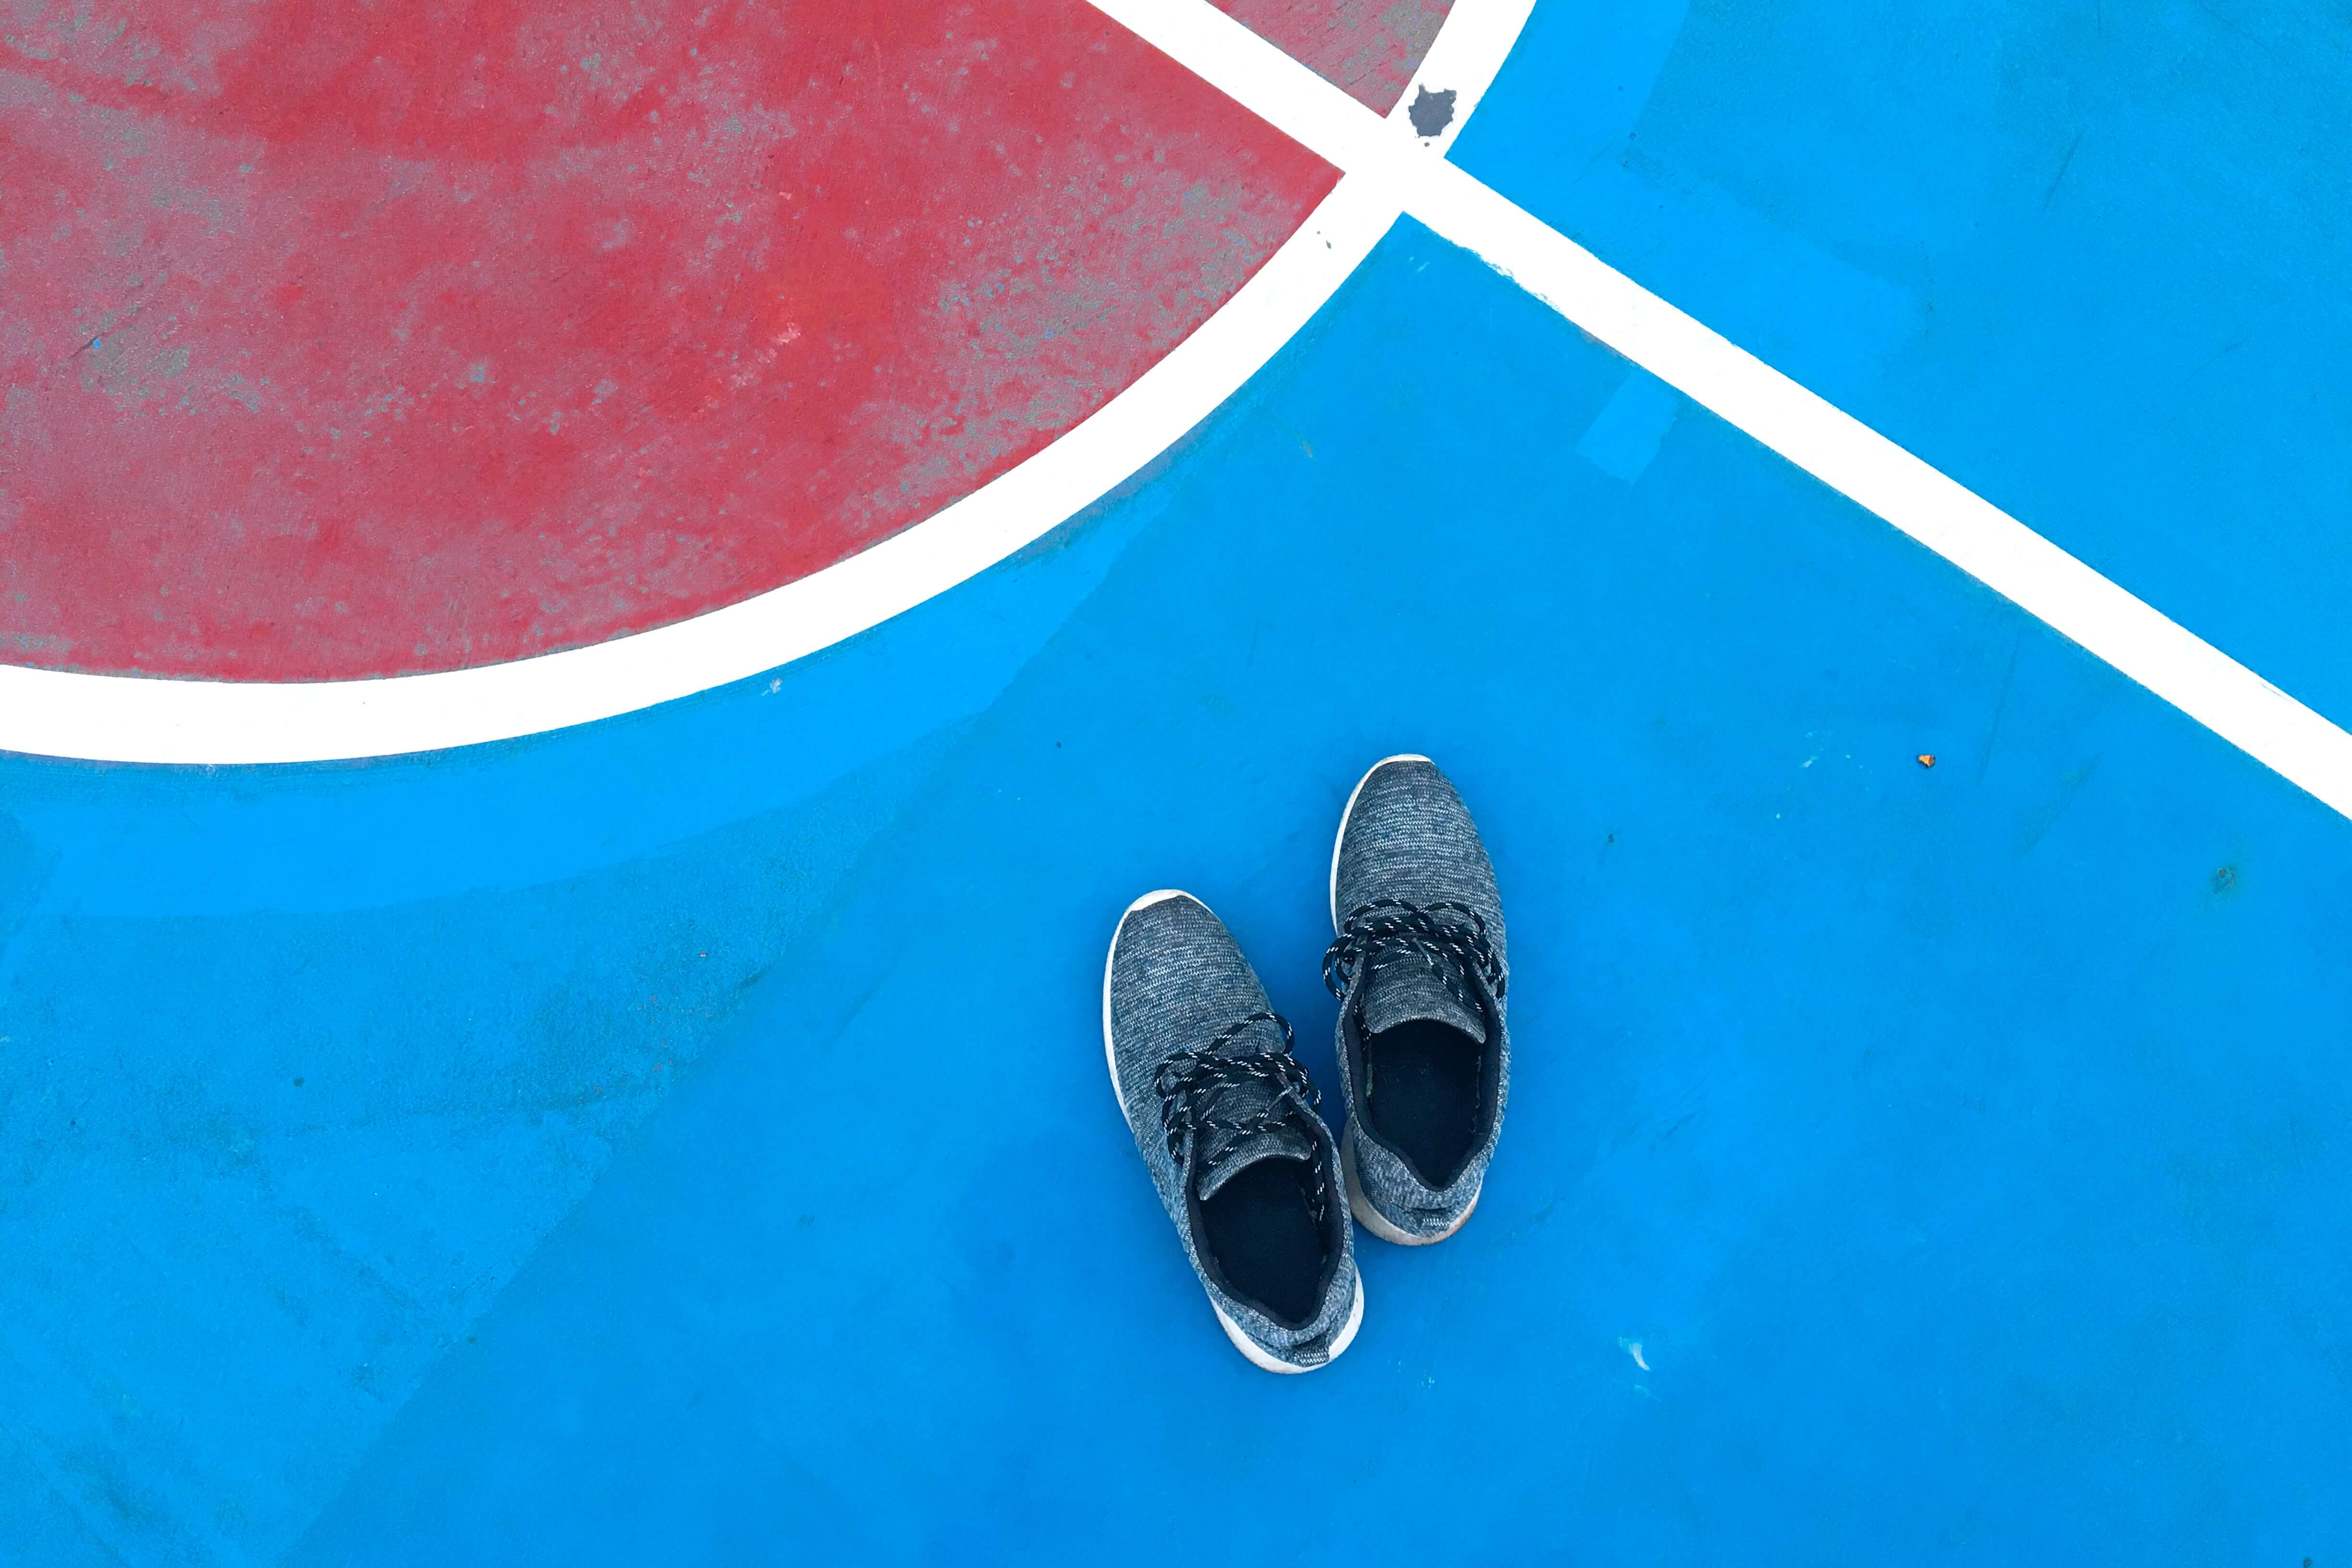 pair of sports shoes on a sports court